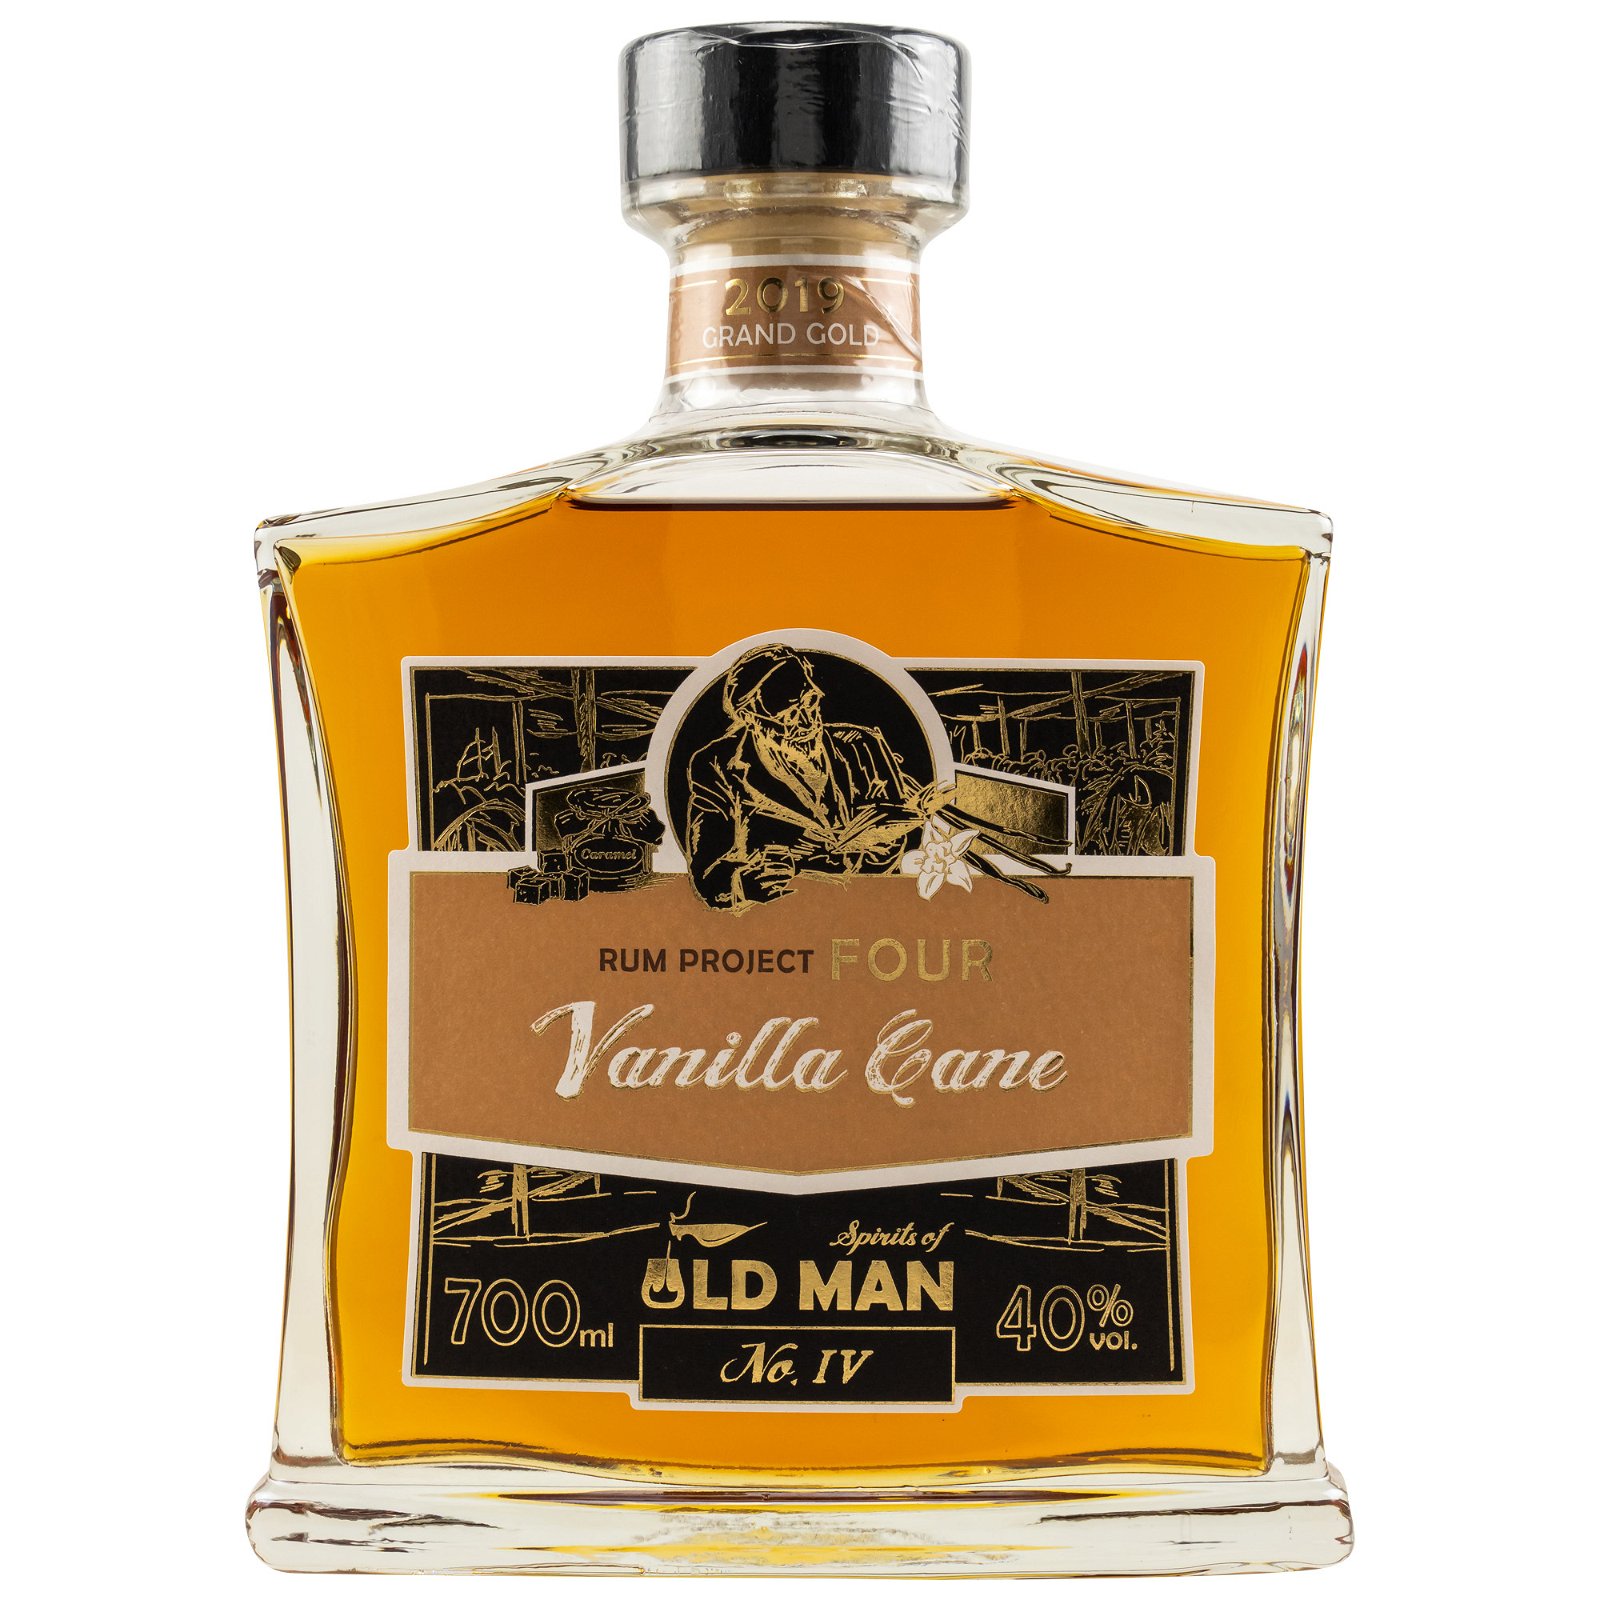 Spirits of Old Man Rum Project Four Vanilla Cane No. IV